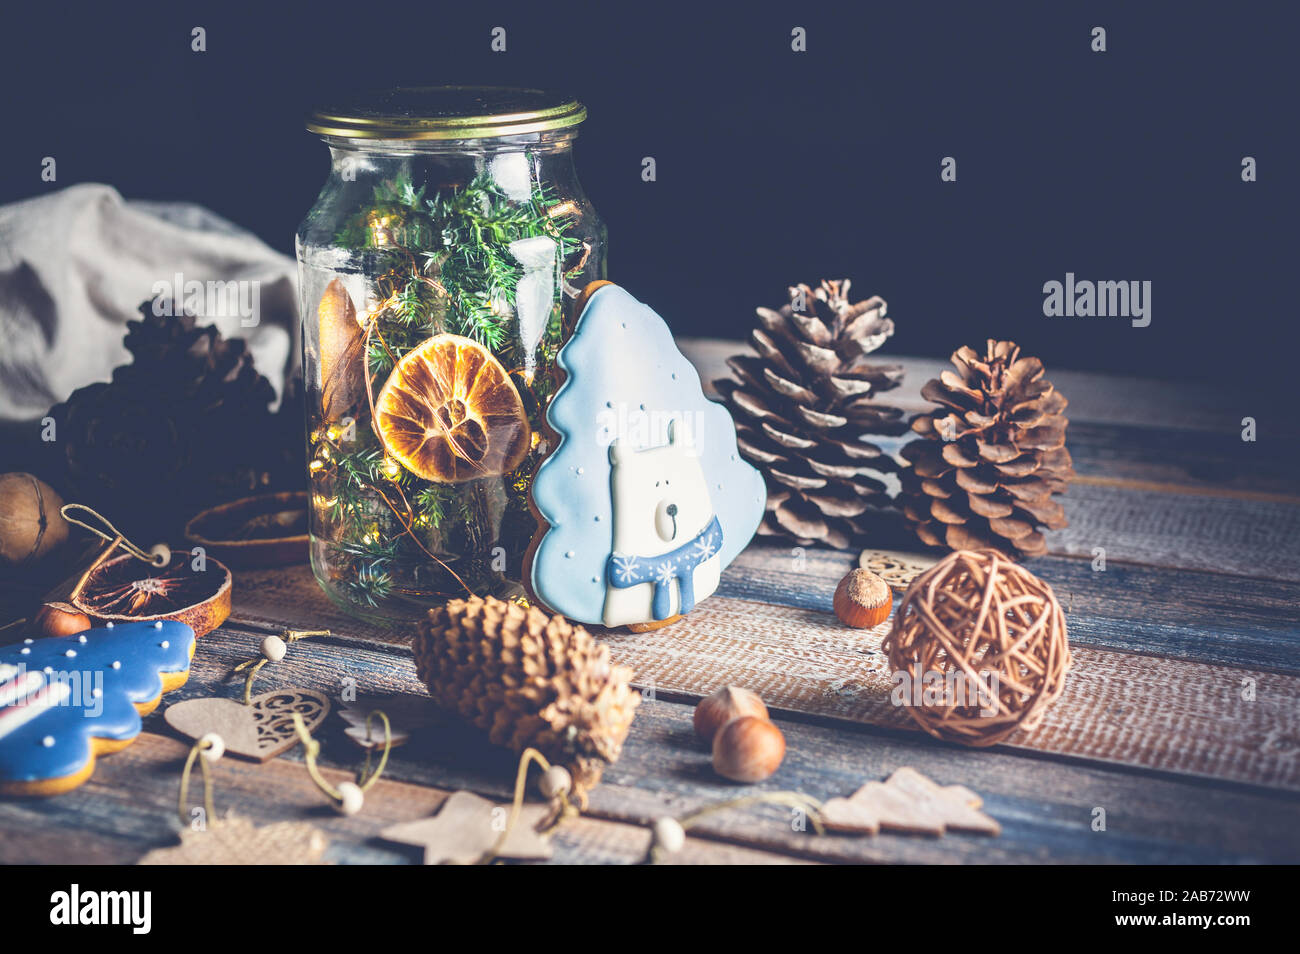 Christmas gingerbread, tree traditional toys on a wooden background. Low key lighting composition. Stock Photo